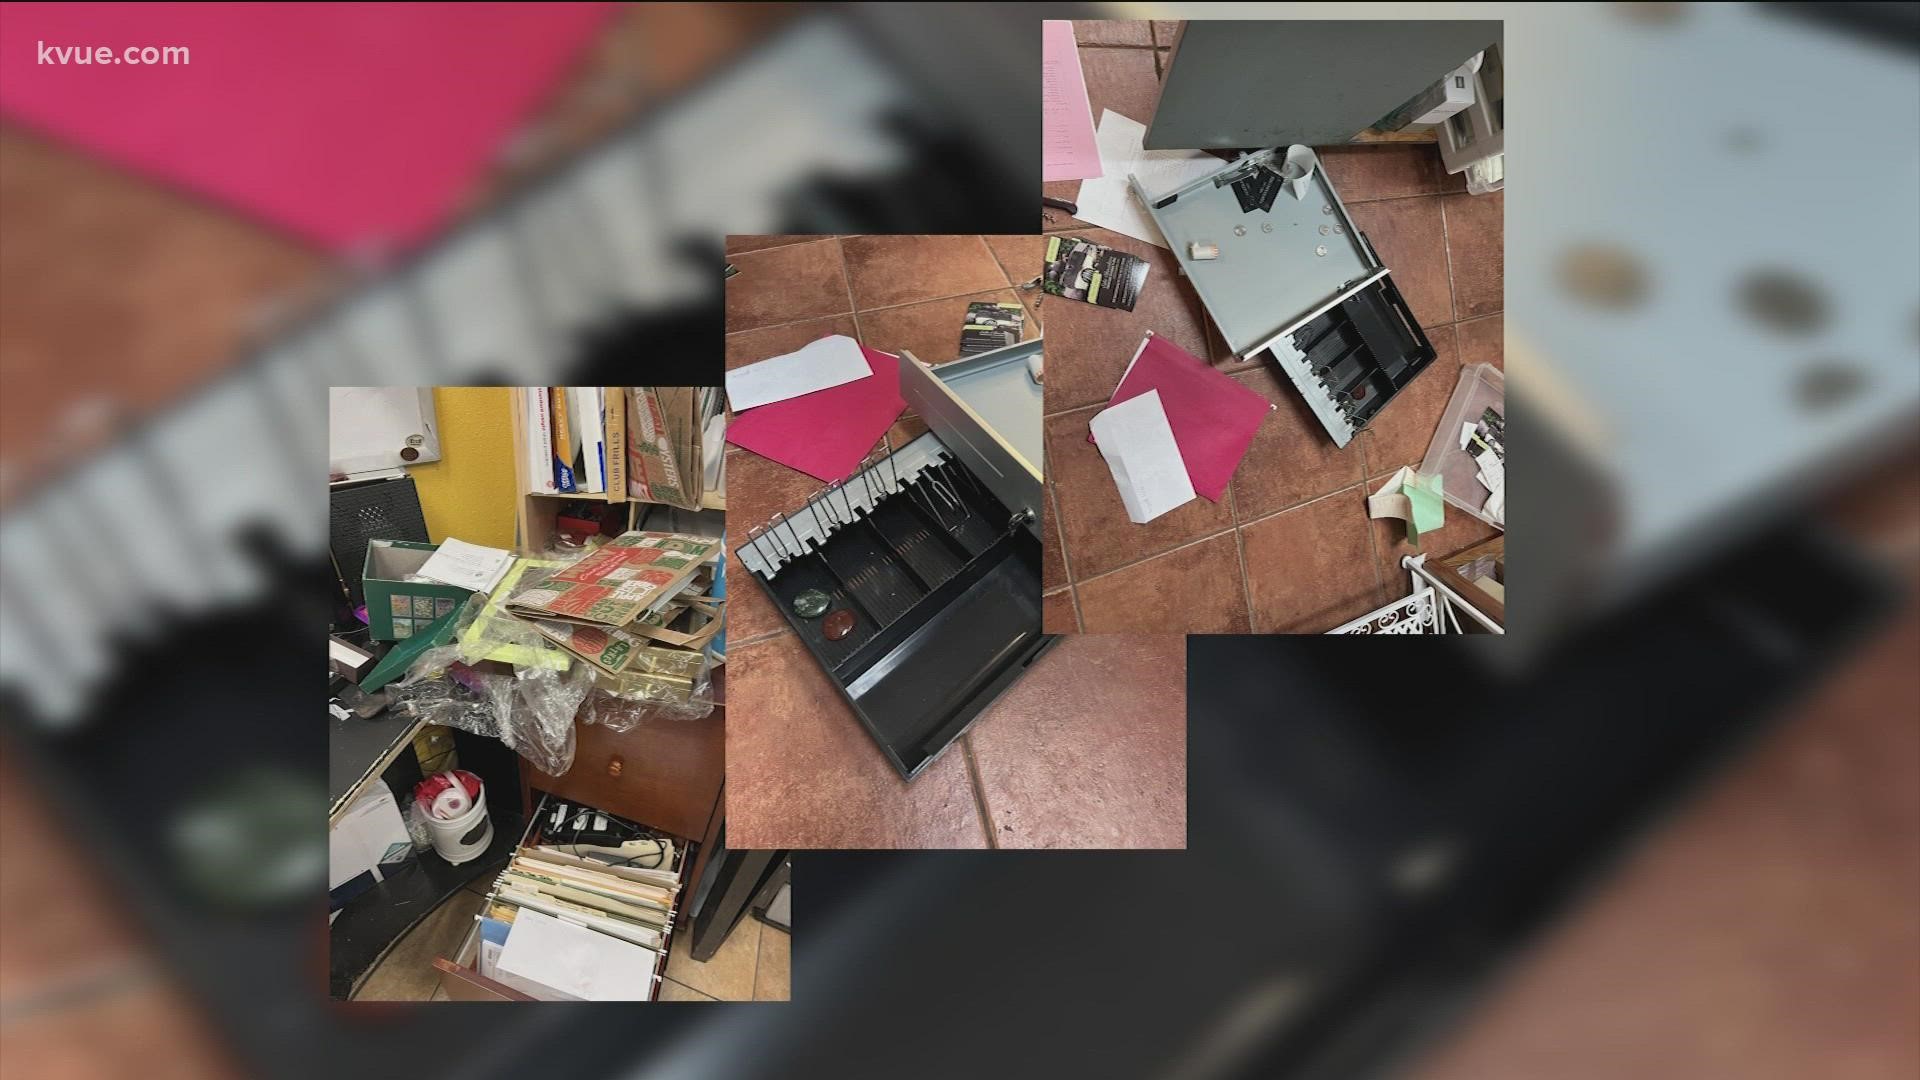 The owner of Edis Chocolates turned to social media after it was broken into last week.